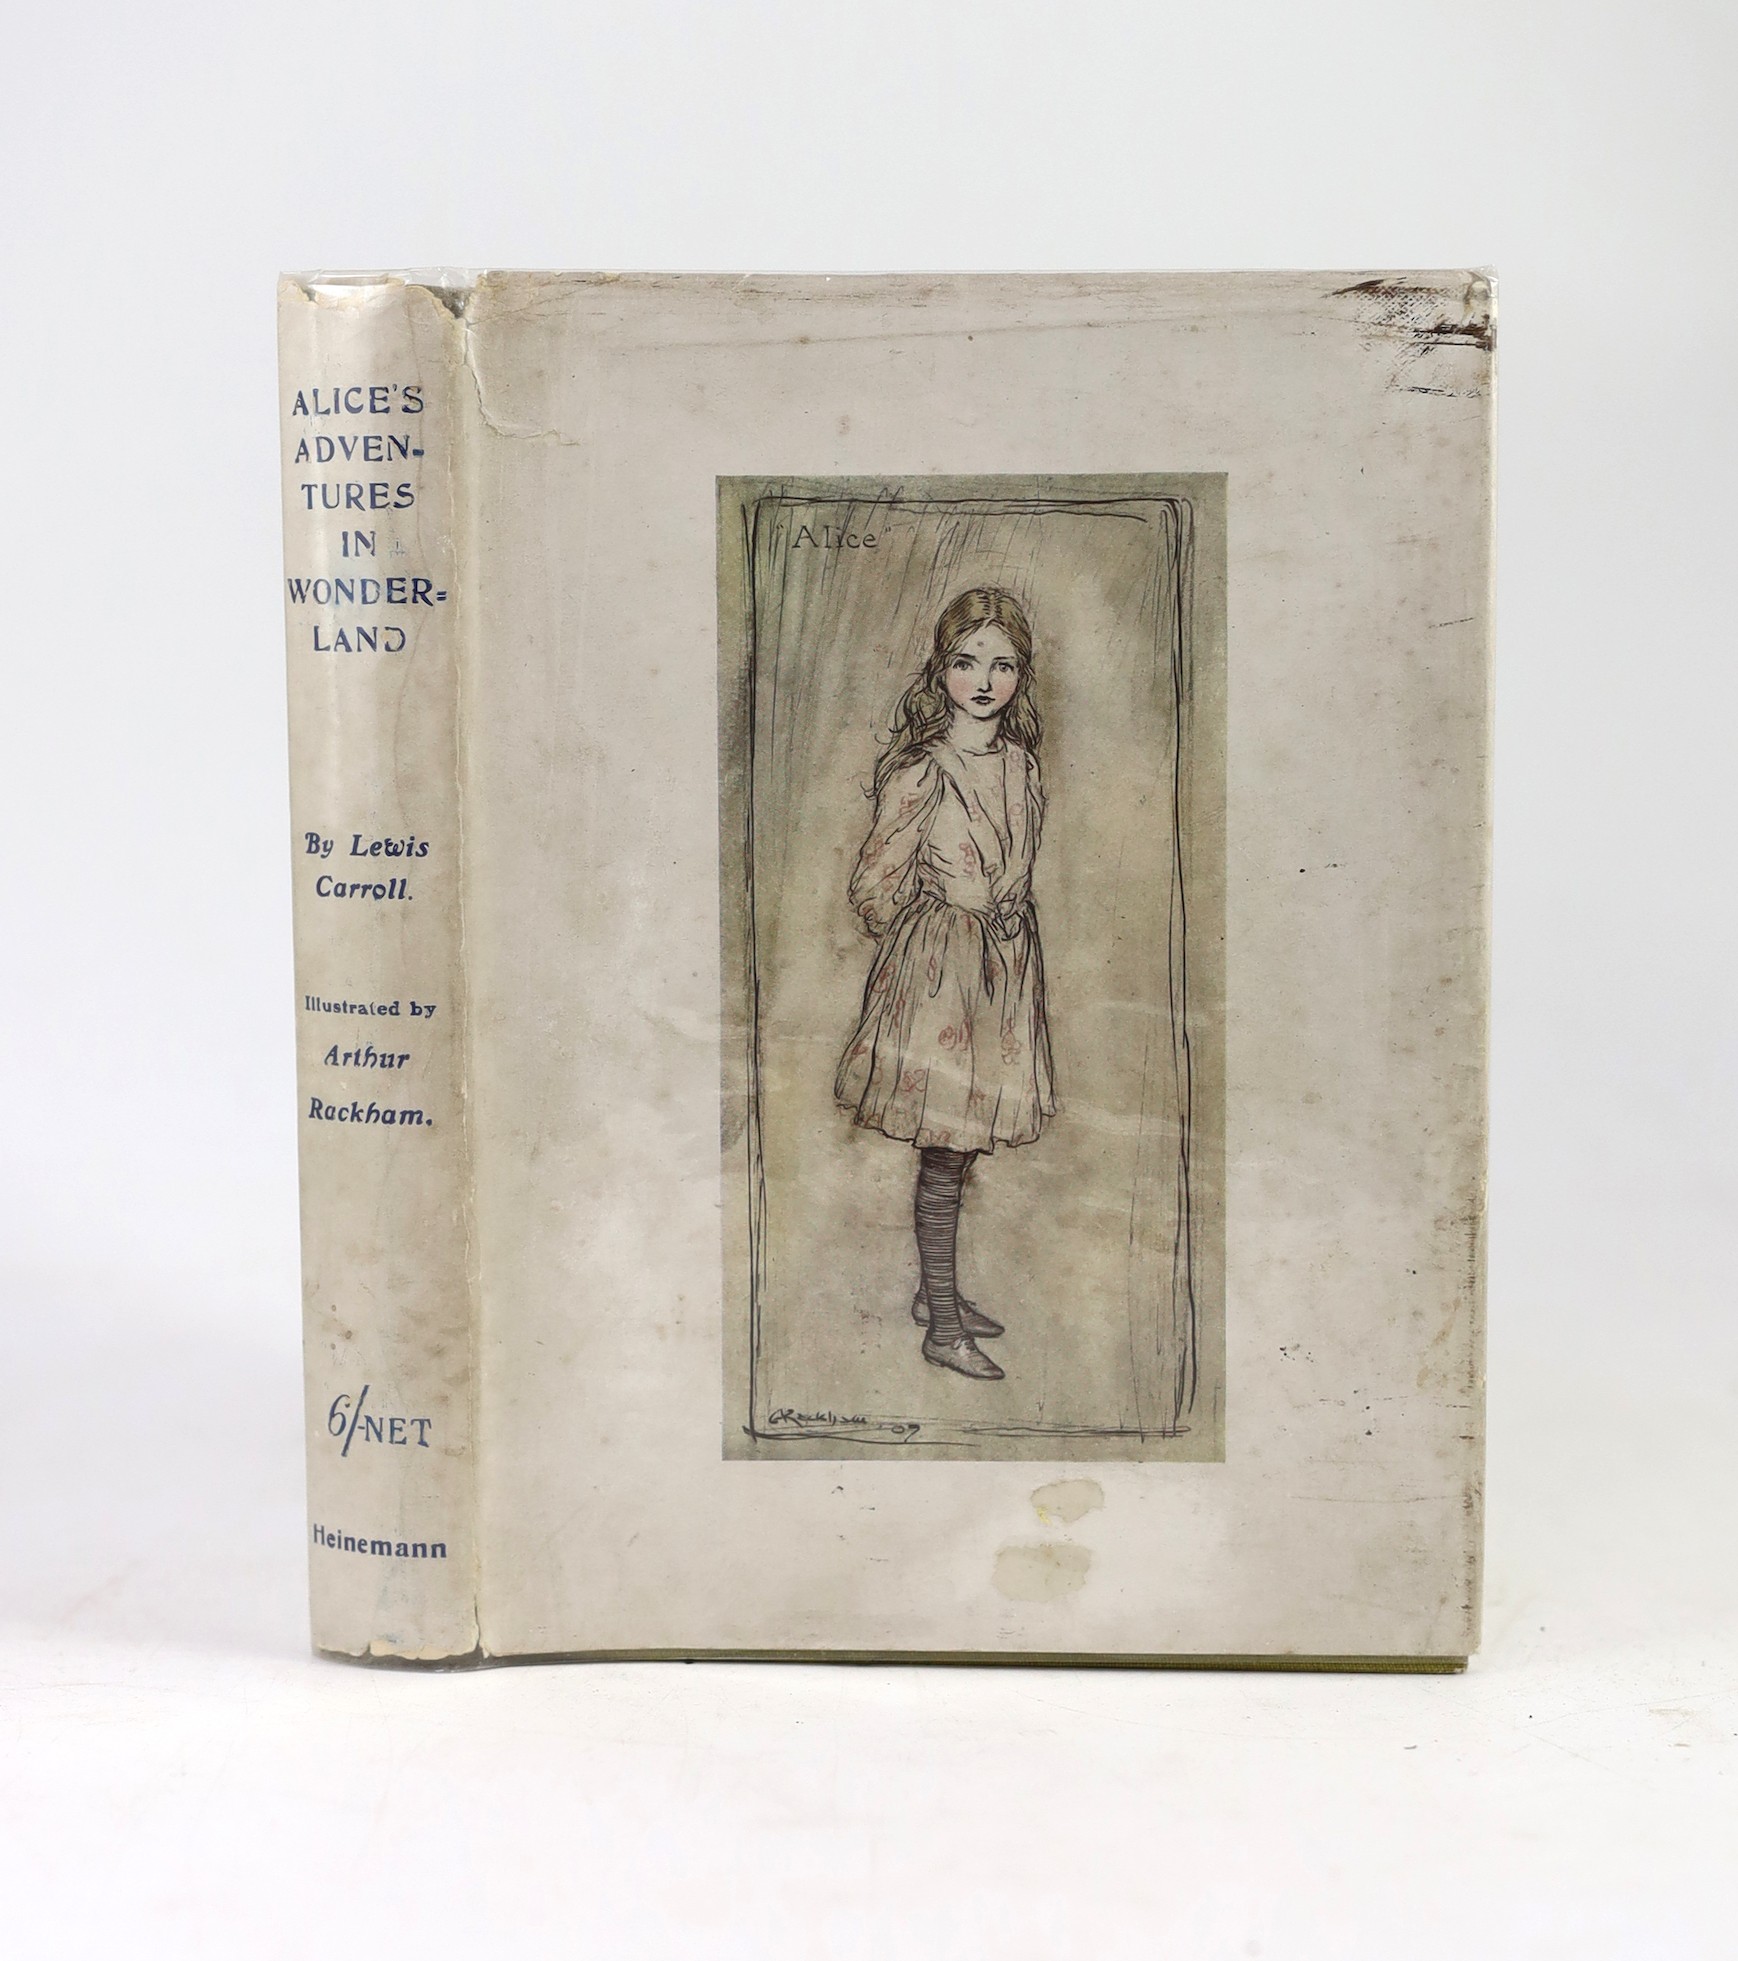 Rackham, Arthur - Rare Early Dustwrapper - Carroll, Lewis - Alice’s Adventures in Wonderland, 1st illustrated edition by Arthur Rackham, 8vo, original green cloth with black lettering and a gilt vignette of a dancing gri